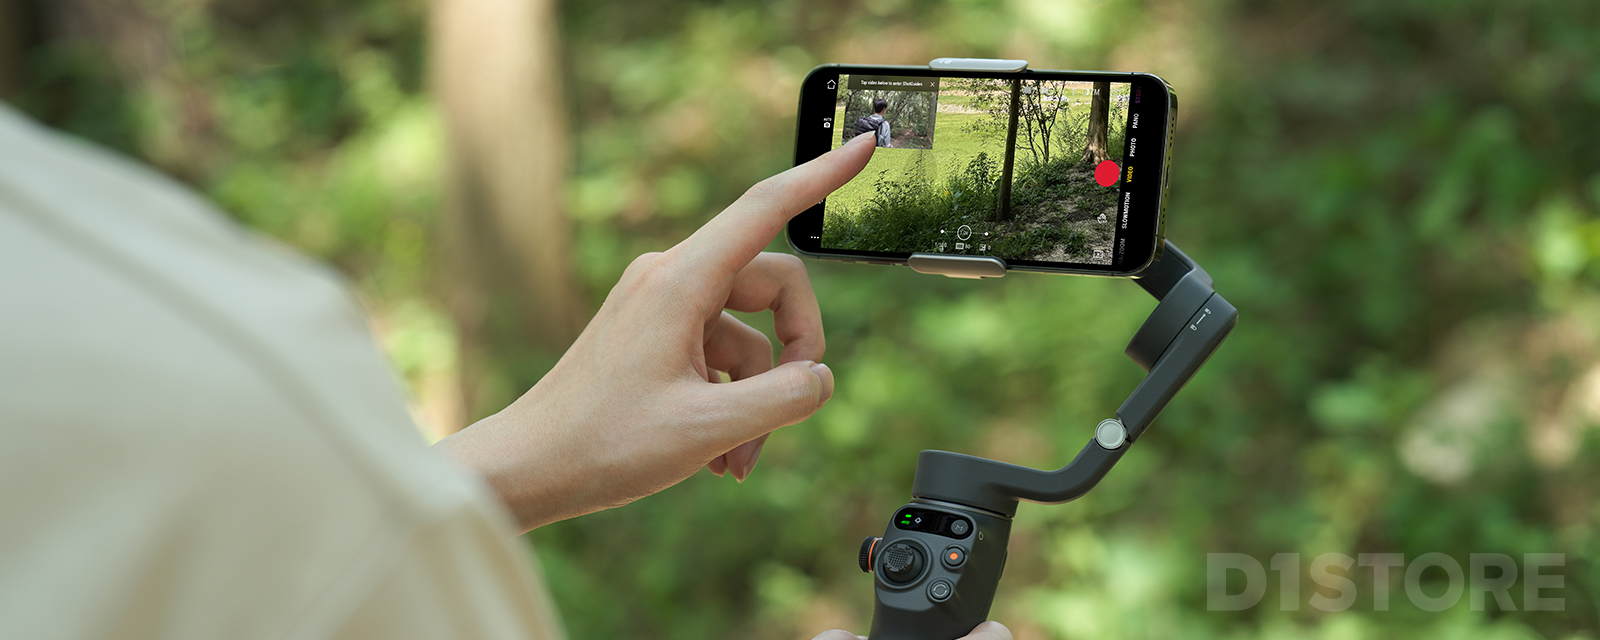 DJI Osmo Mobile 7: The Next Big Thing In Mobile Gimbals